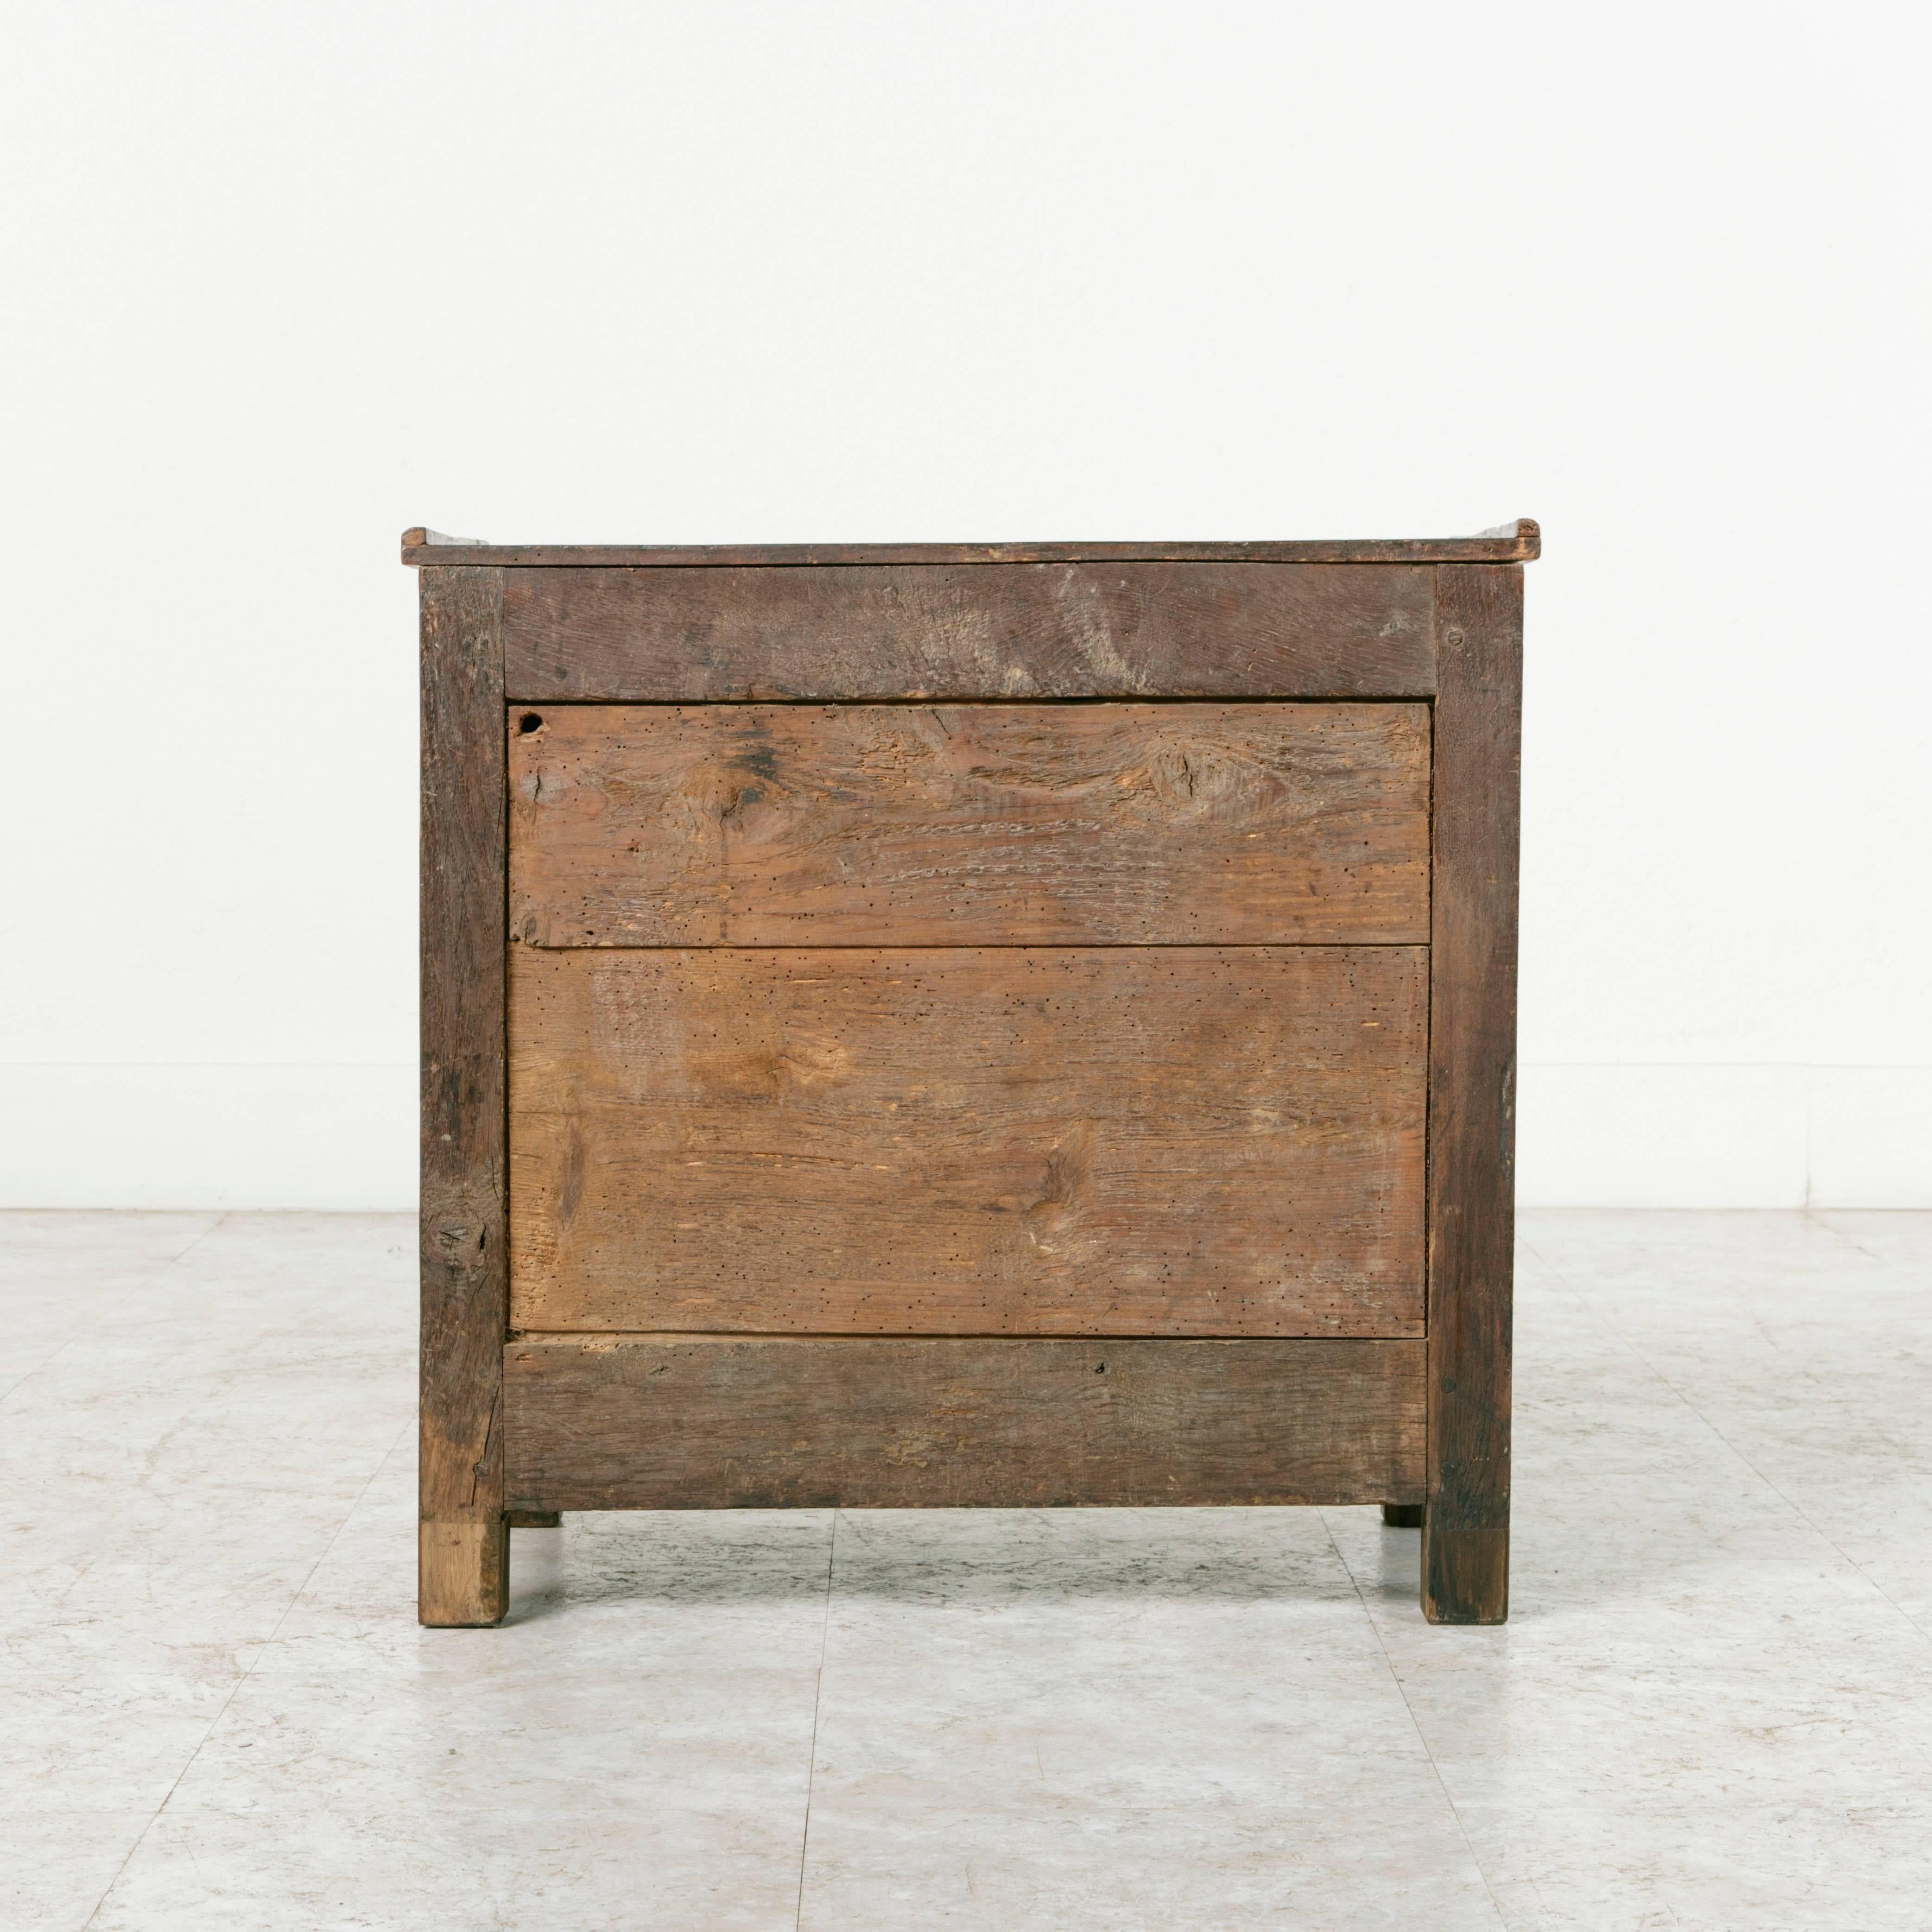 Late 18th Century 18th Century French Cabinet Side Table Solid Oak with Iron Latch from Normandy